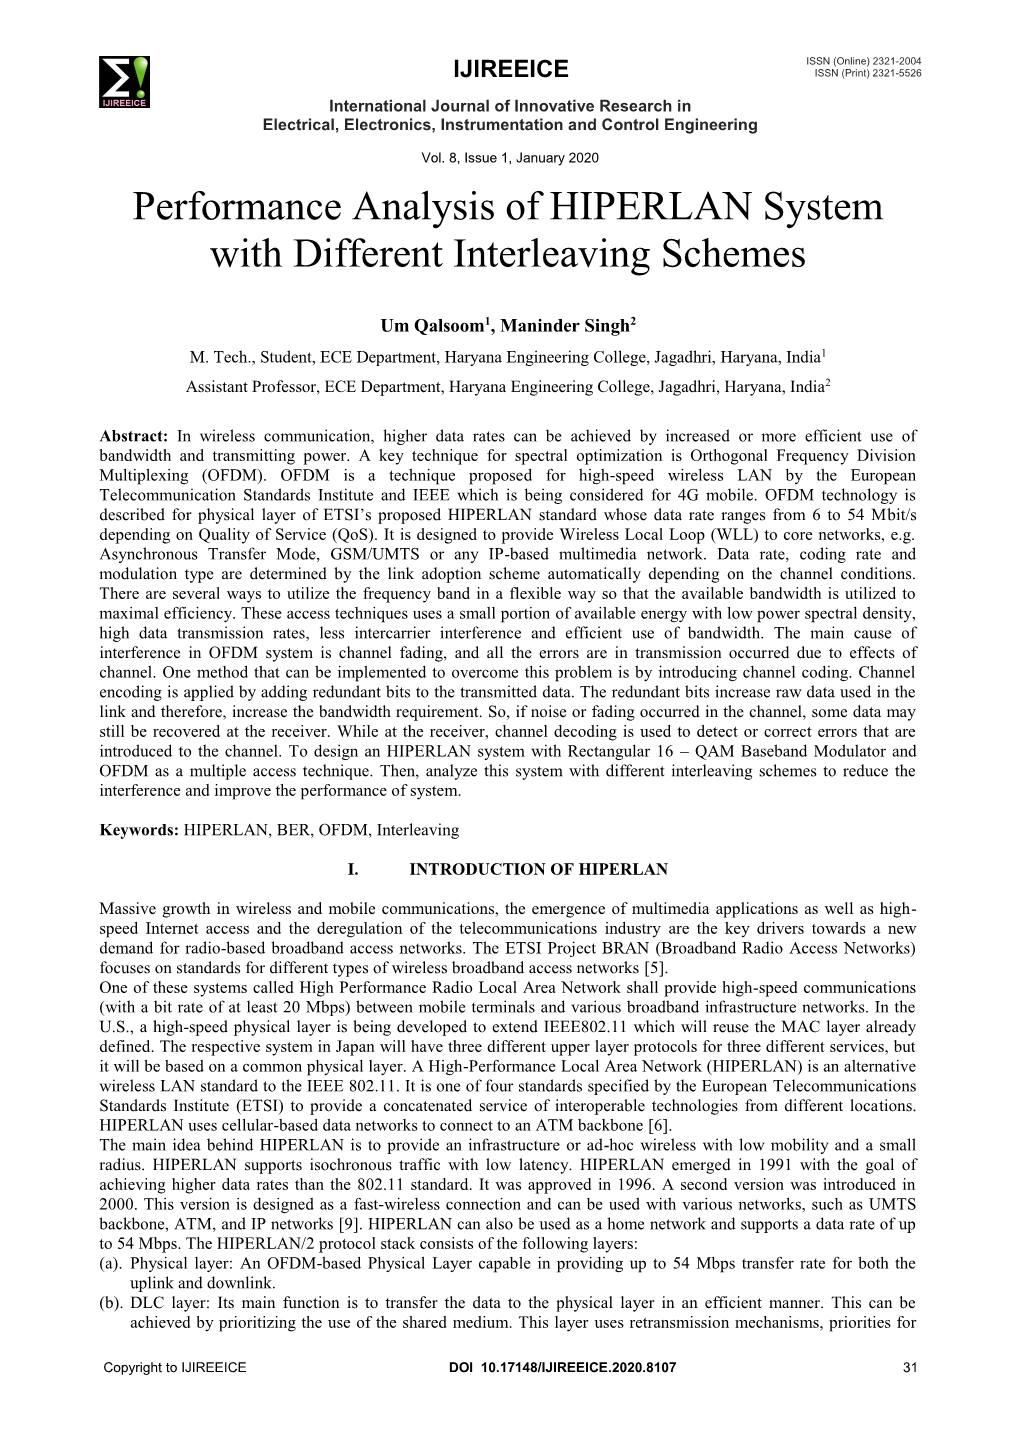 Performance Analysis of HIPERLAN System with Different Interleaving Schemes